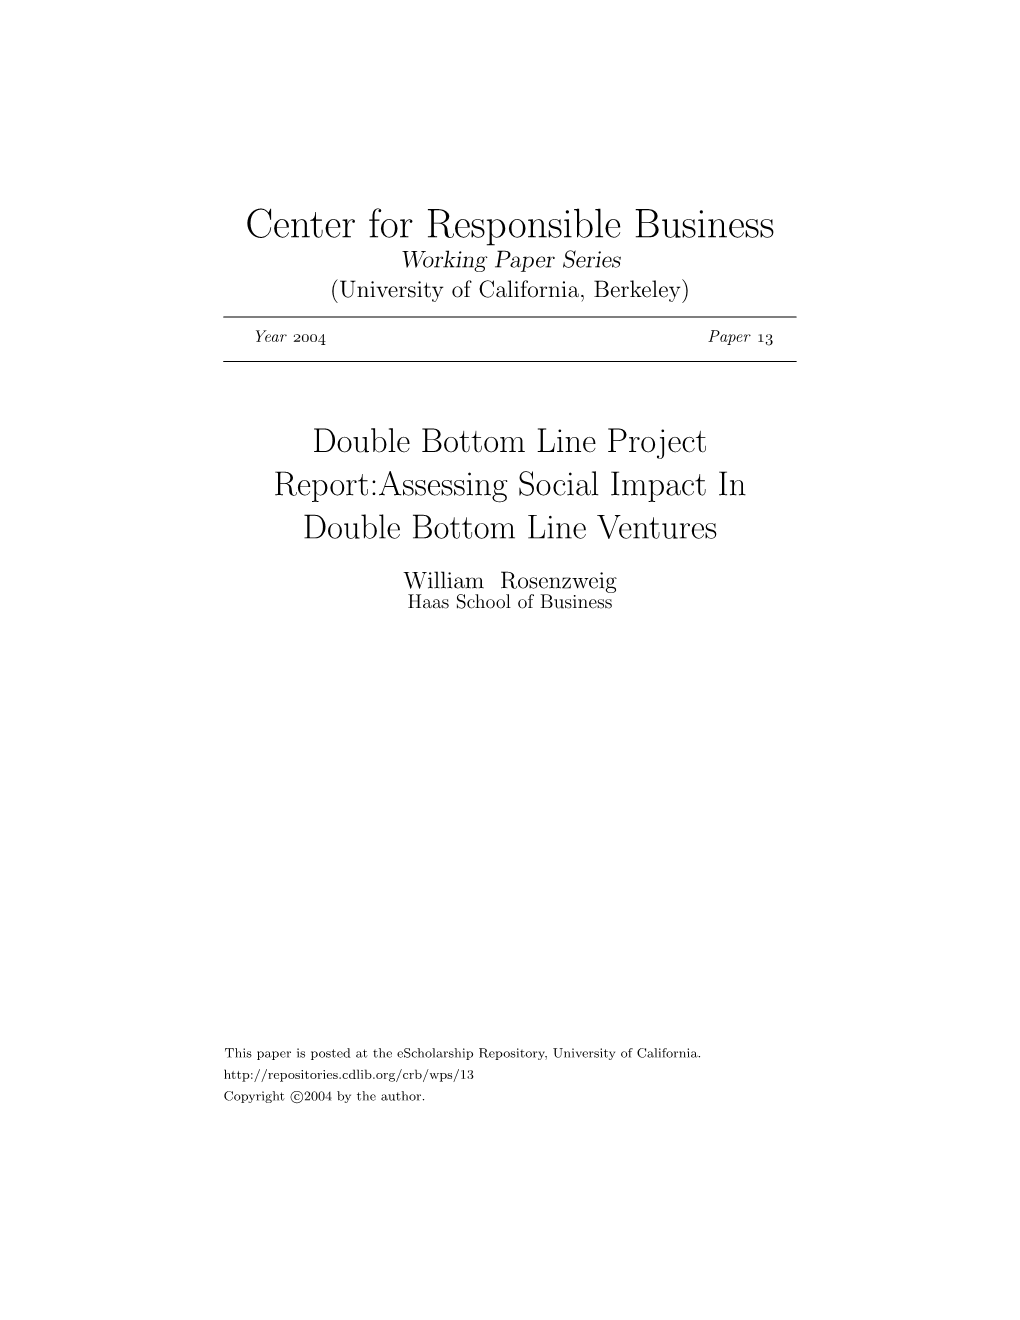 Double Bottom Line Project Report:Assessing Social Impact in Double Bottom Line Ventures William Rosenzweig Haas School of Business